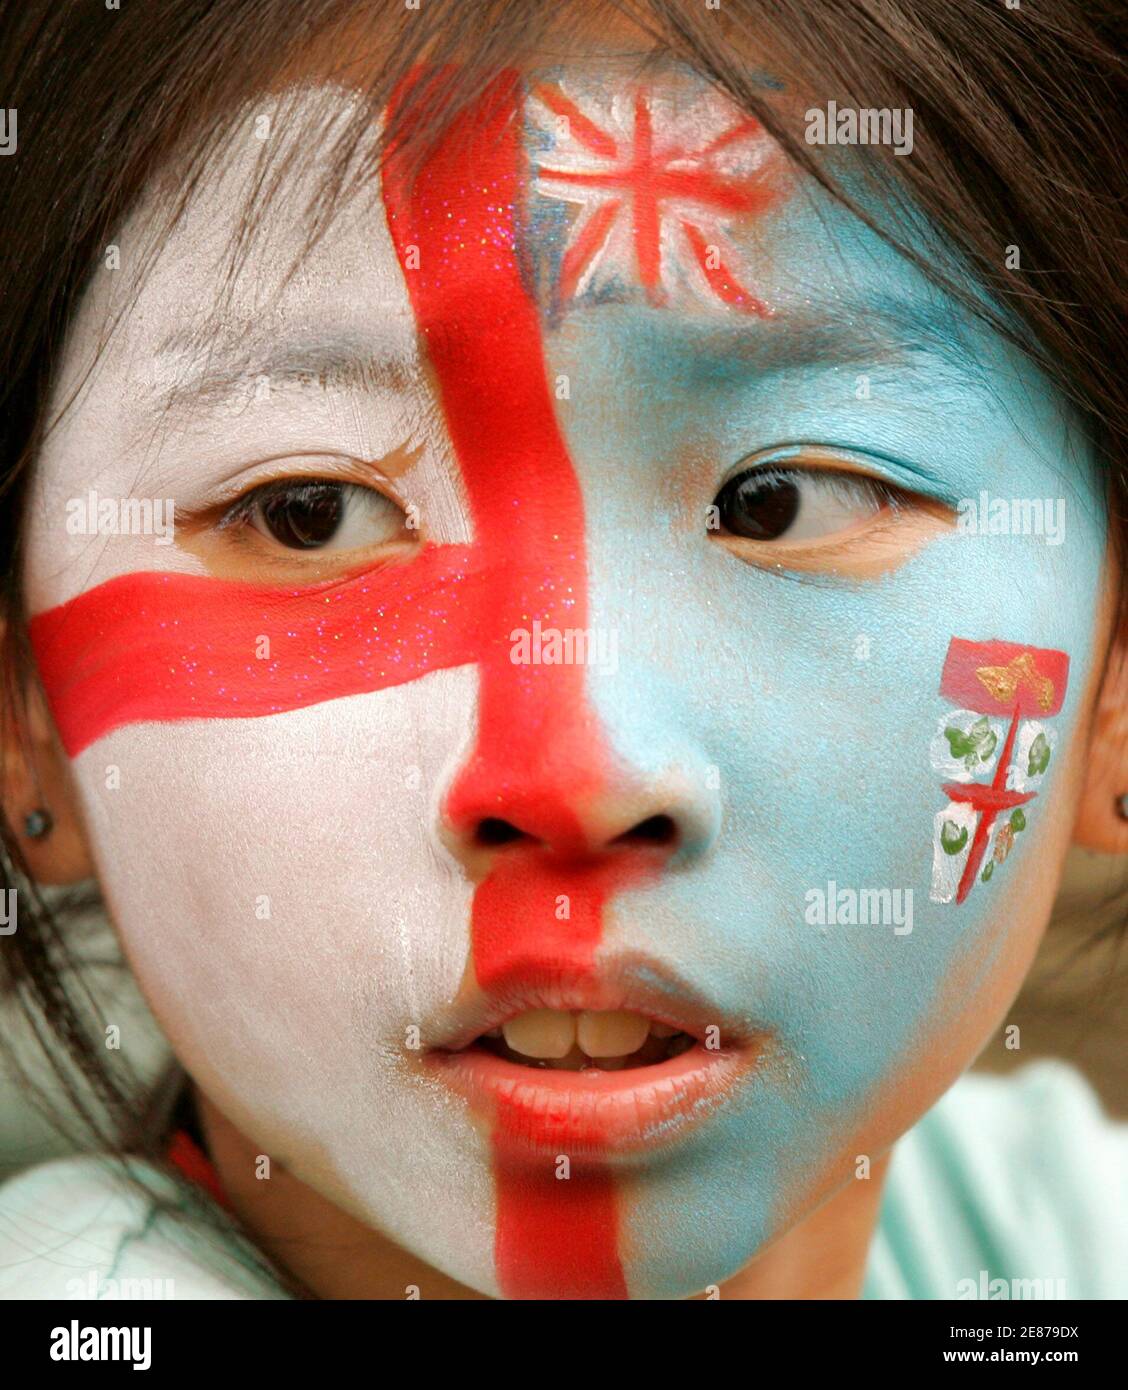 ENGLAND RUGBY WORLDCUP 2019  FOOTBALL 6pk FACE PAINTS RED & WHITE FREE UK P&P 